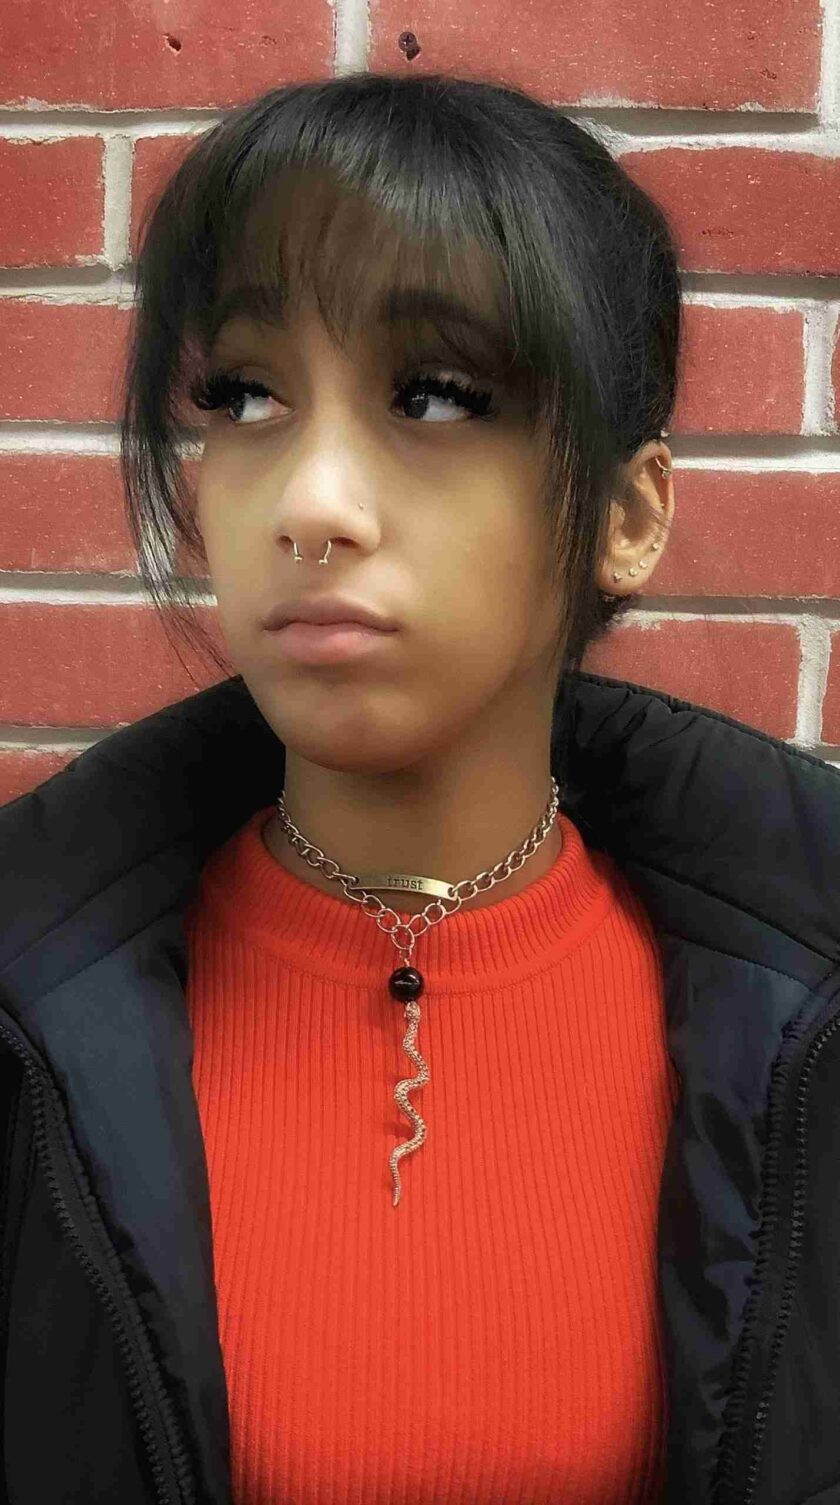 a young girl with a piercing on her nose.